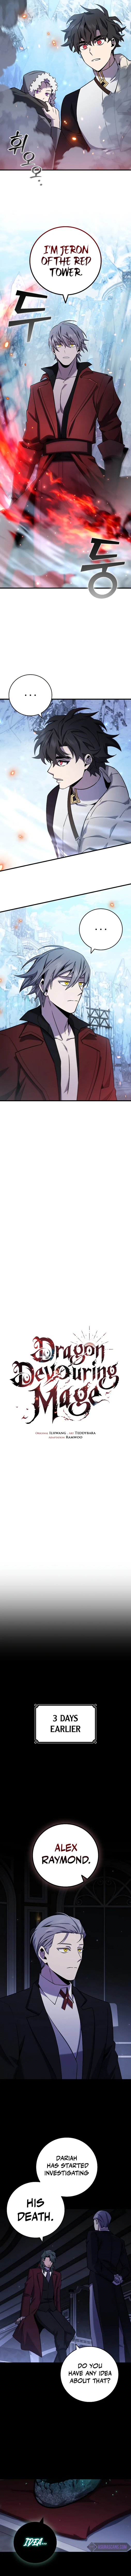 Dragon-Devouring Mage - Chapter 42 Page 3